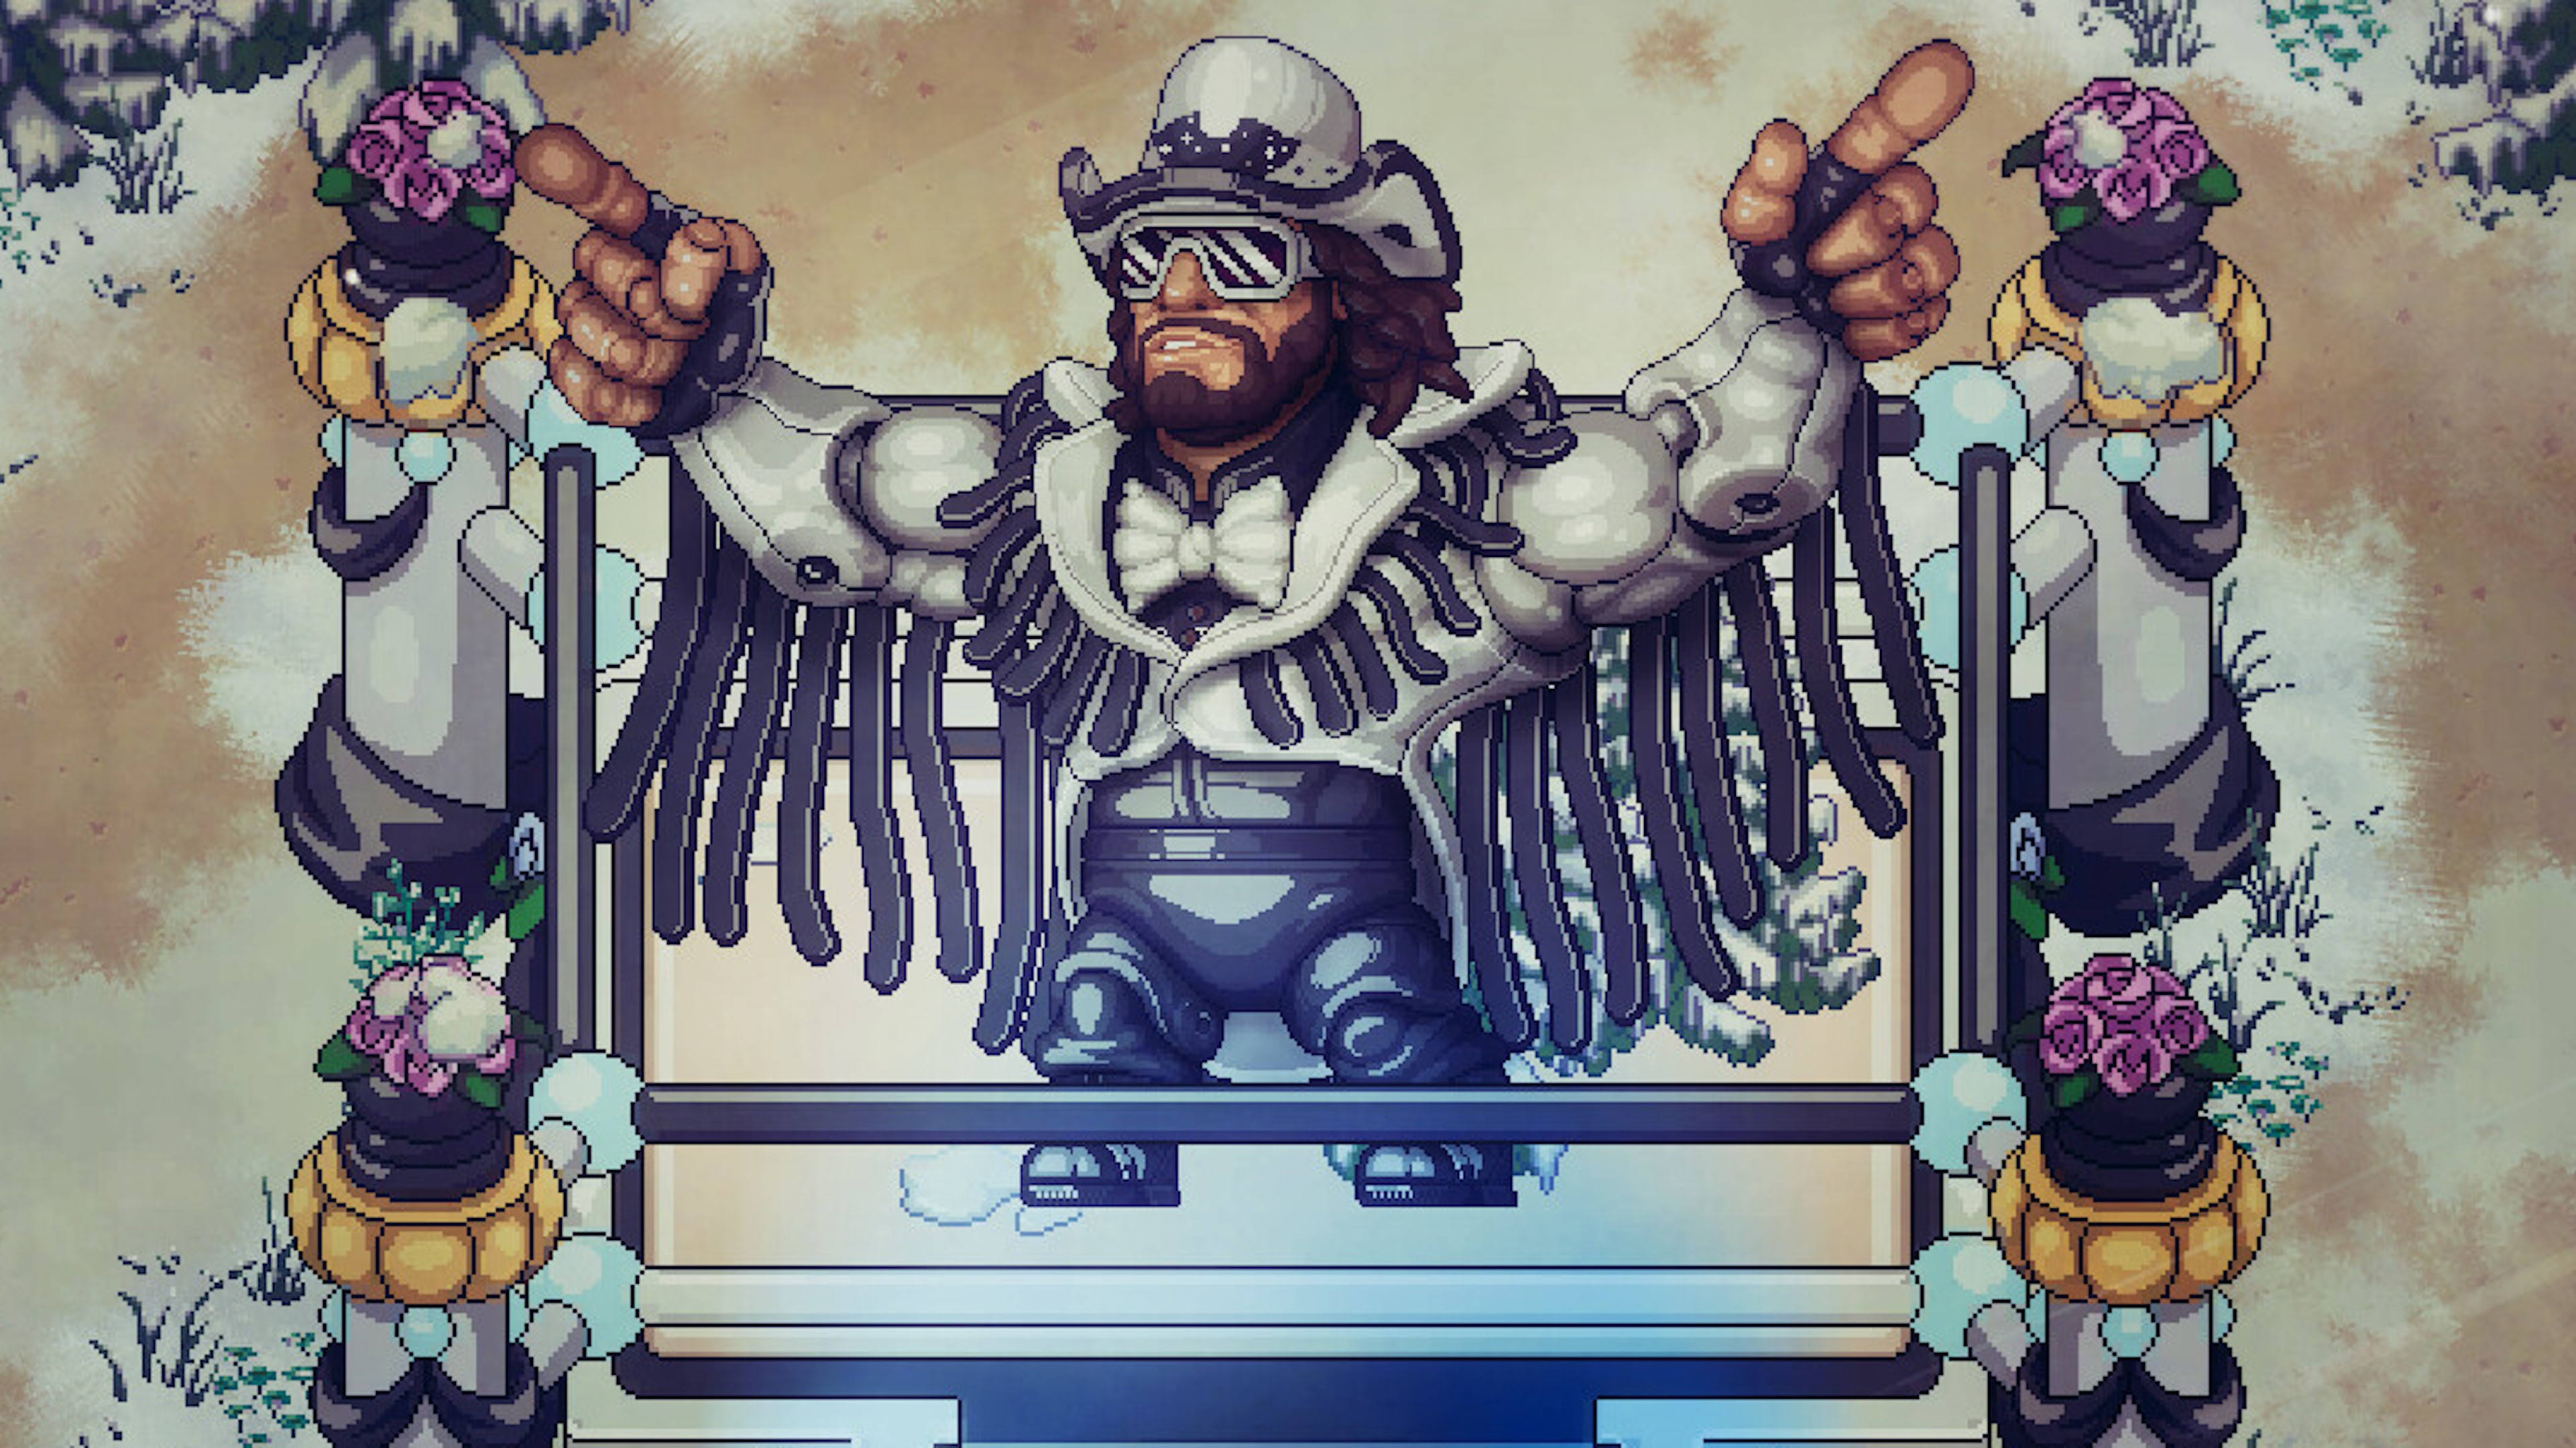 WrestleQuest Gameplay Shows New Enemies, Puzzles & More